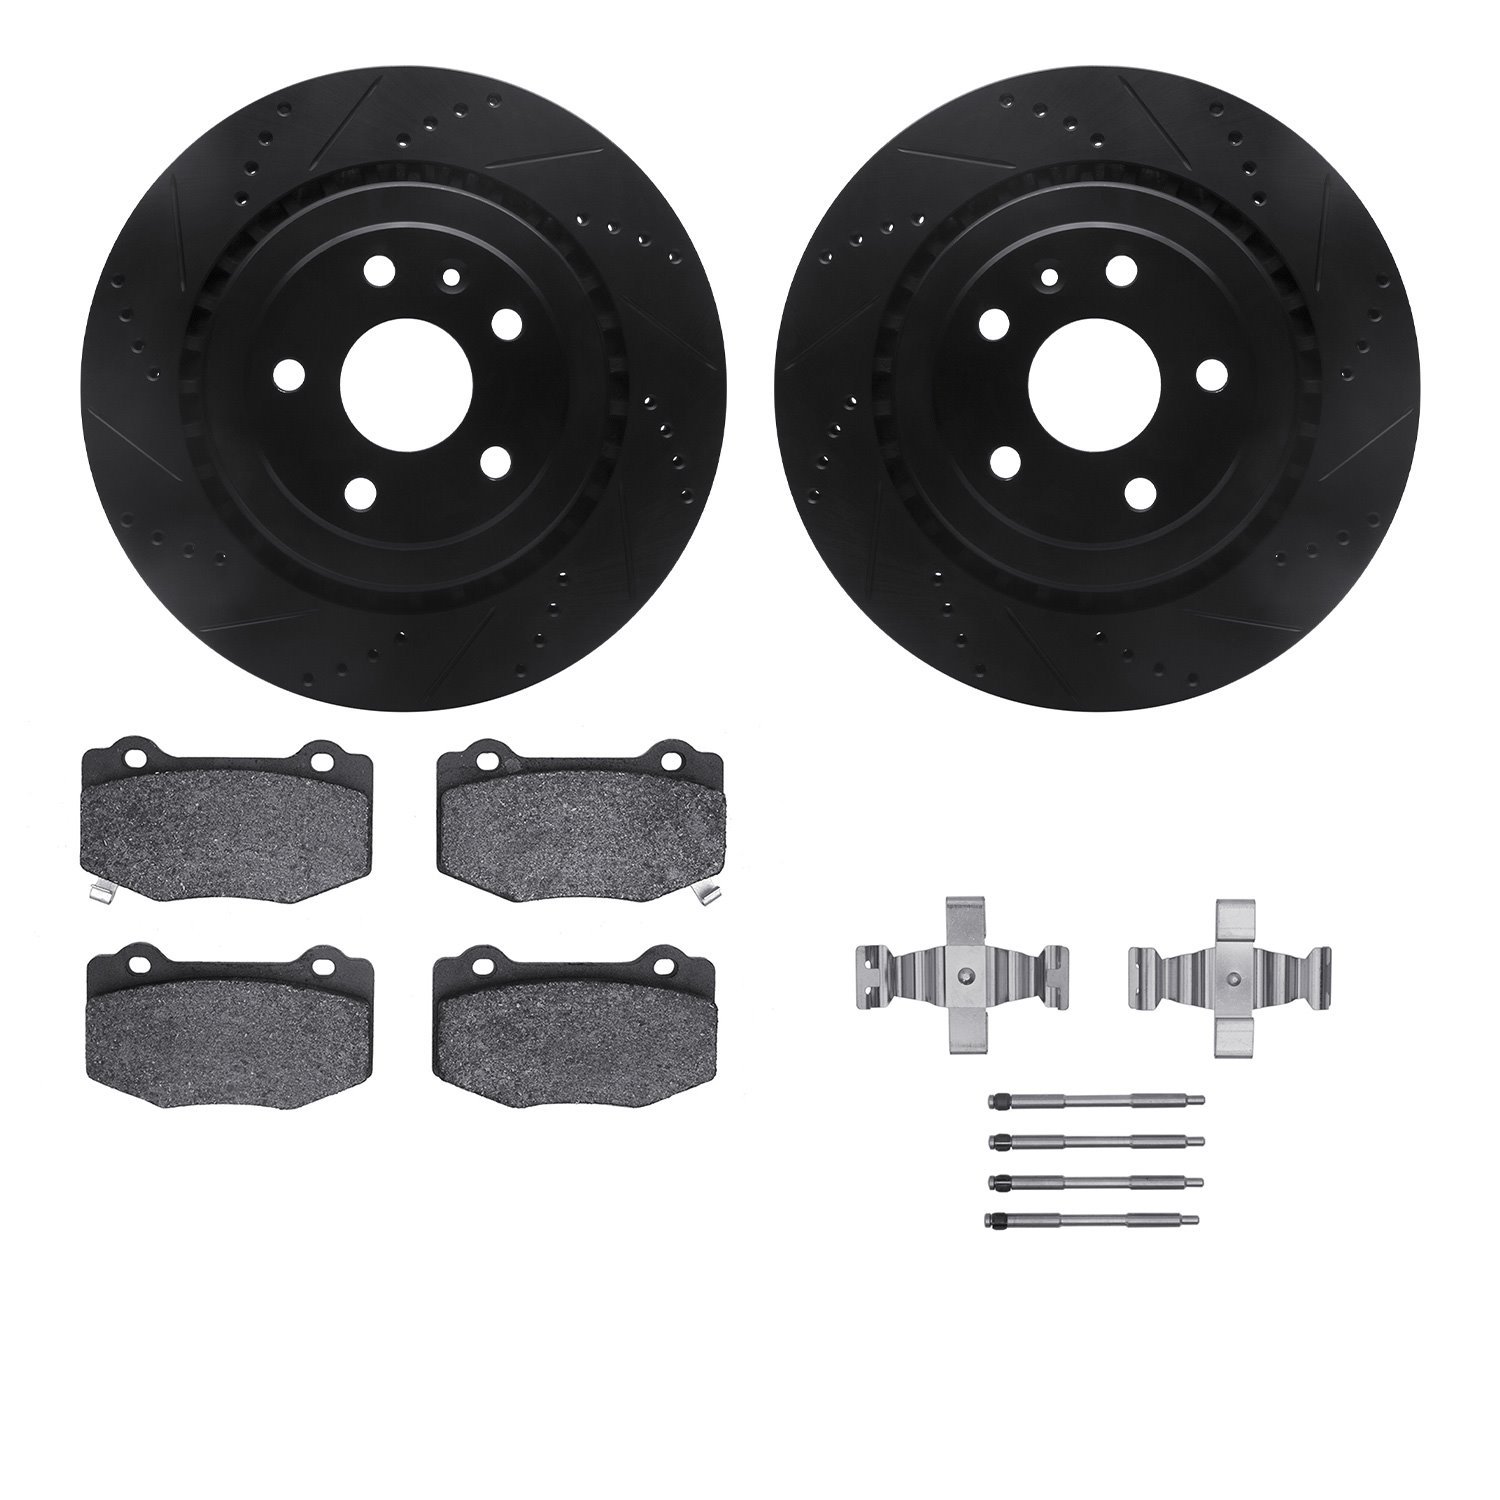 8312-47068 Drilled/Slotted Brake Rotors with 3000-Series Ceramic Brake Pads Kit & Hardware [Black], Fits Select GM, Position: Re